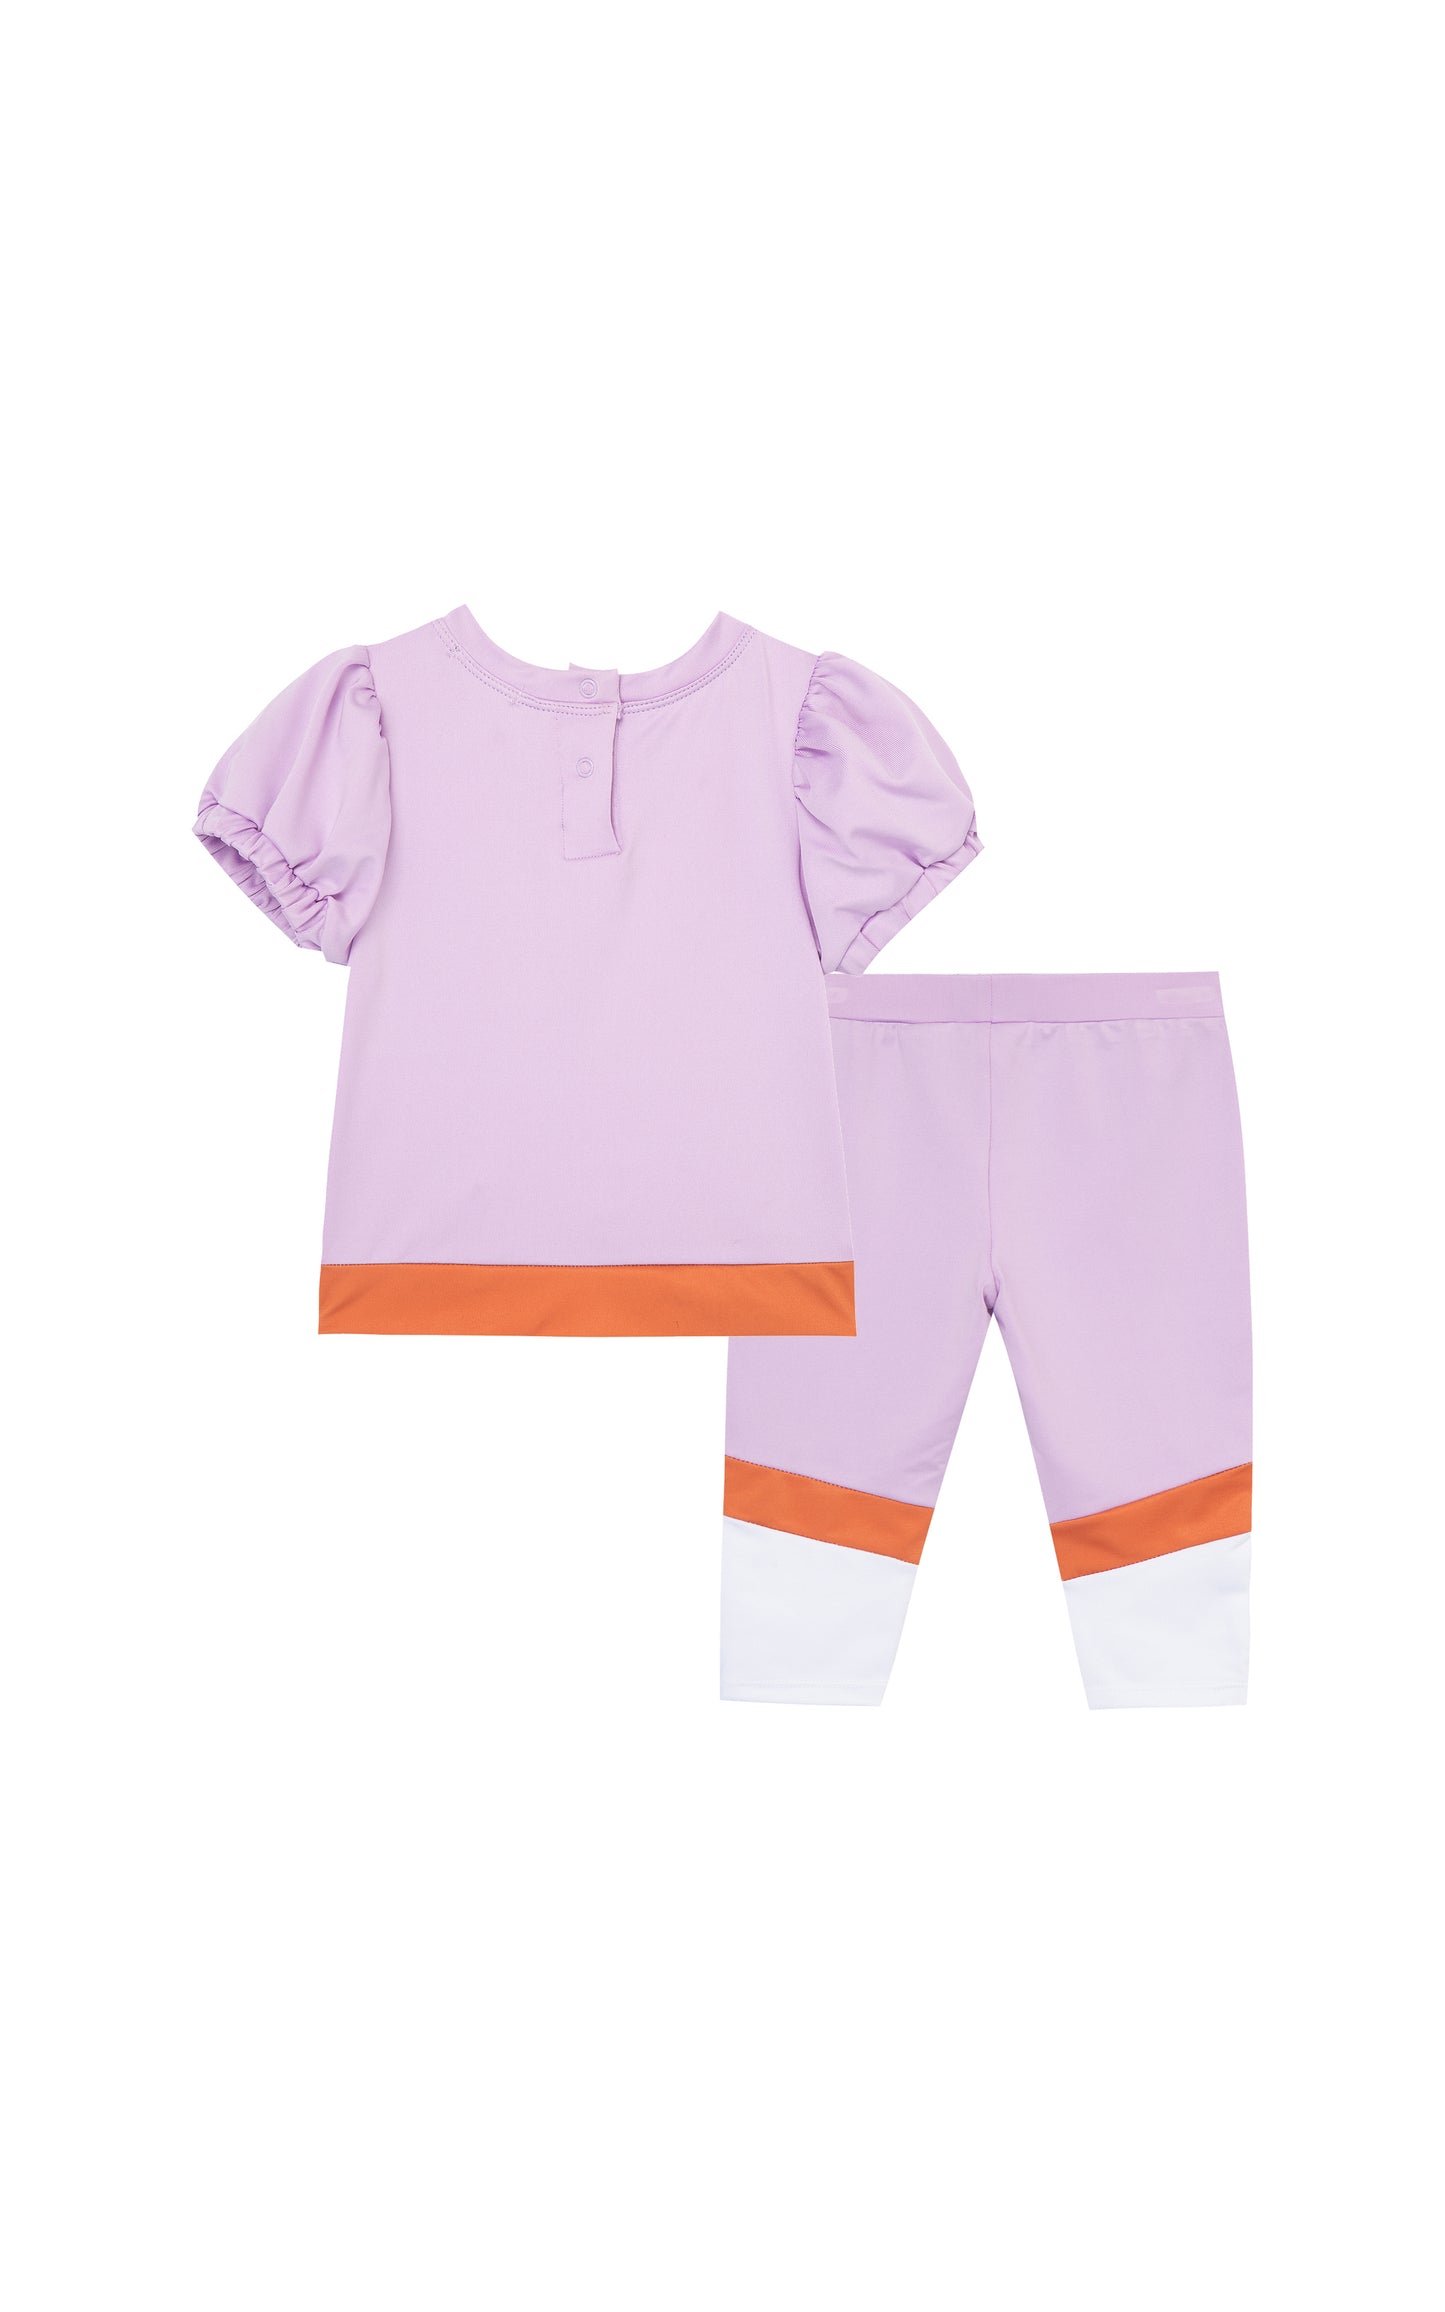 BACK VIEW OF LIGHT PURPLE T-SHIRT WITH ORANGE AND WHITE STRIPES AND MATCHING LEGGINGS